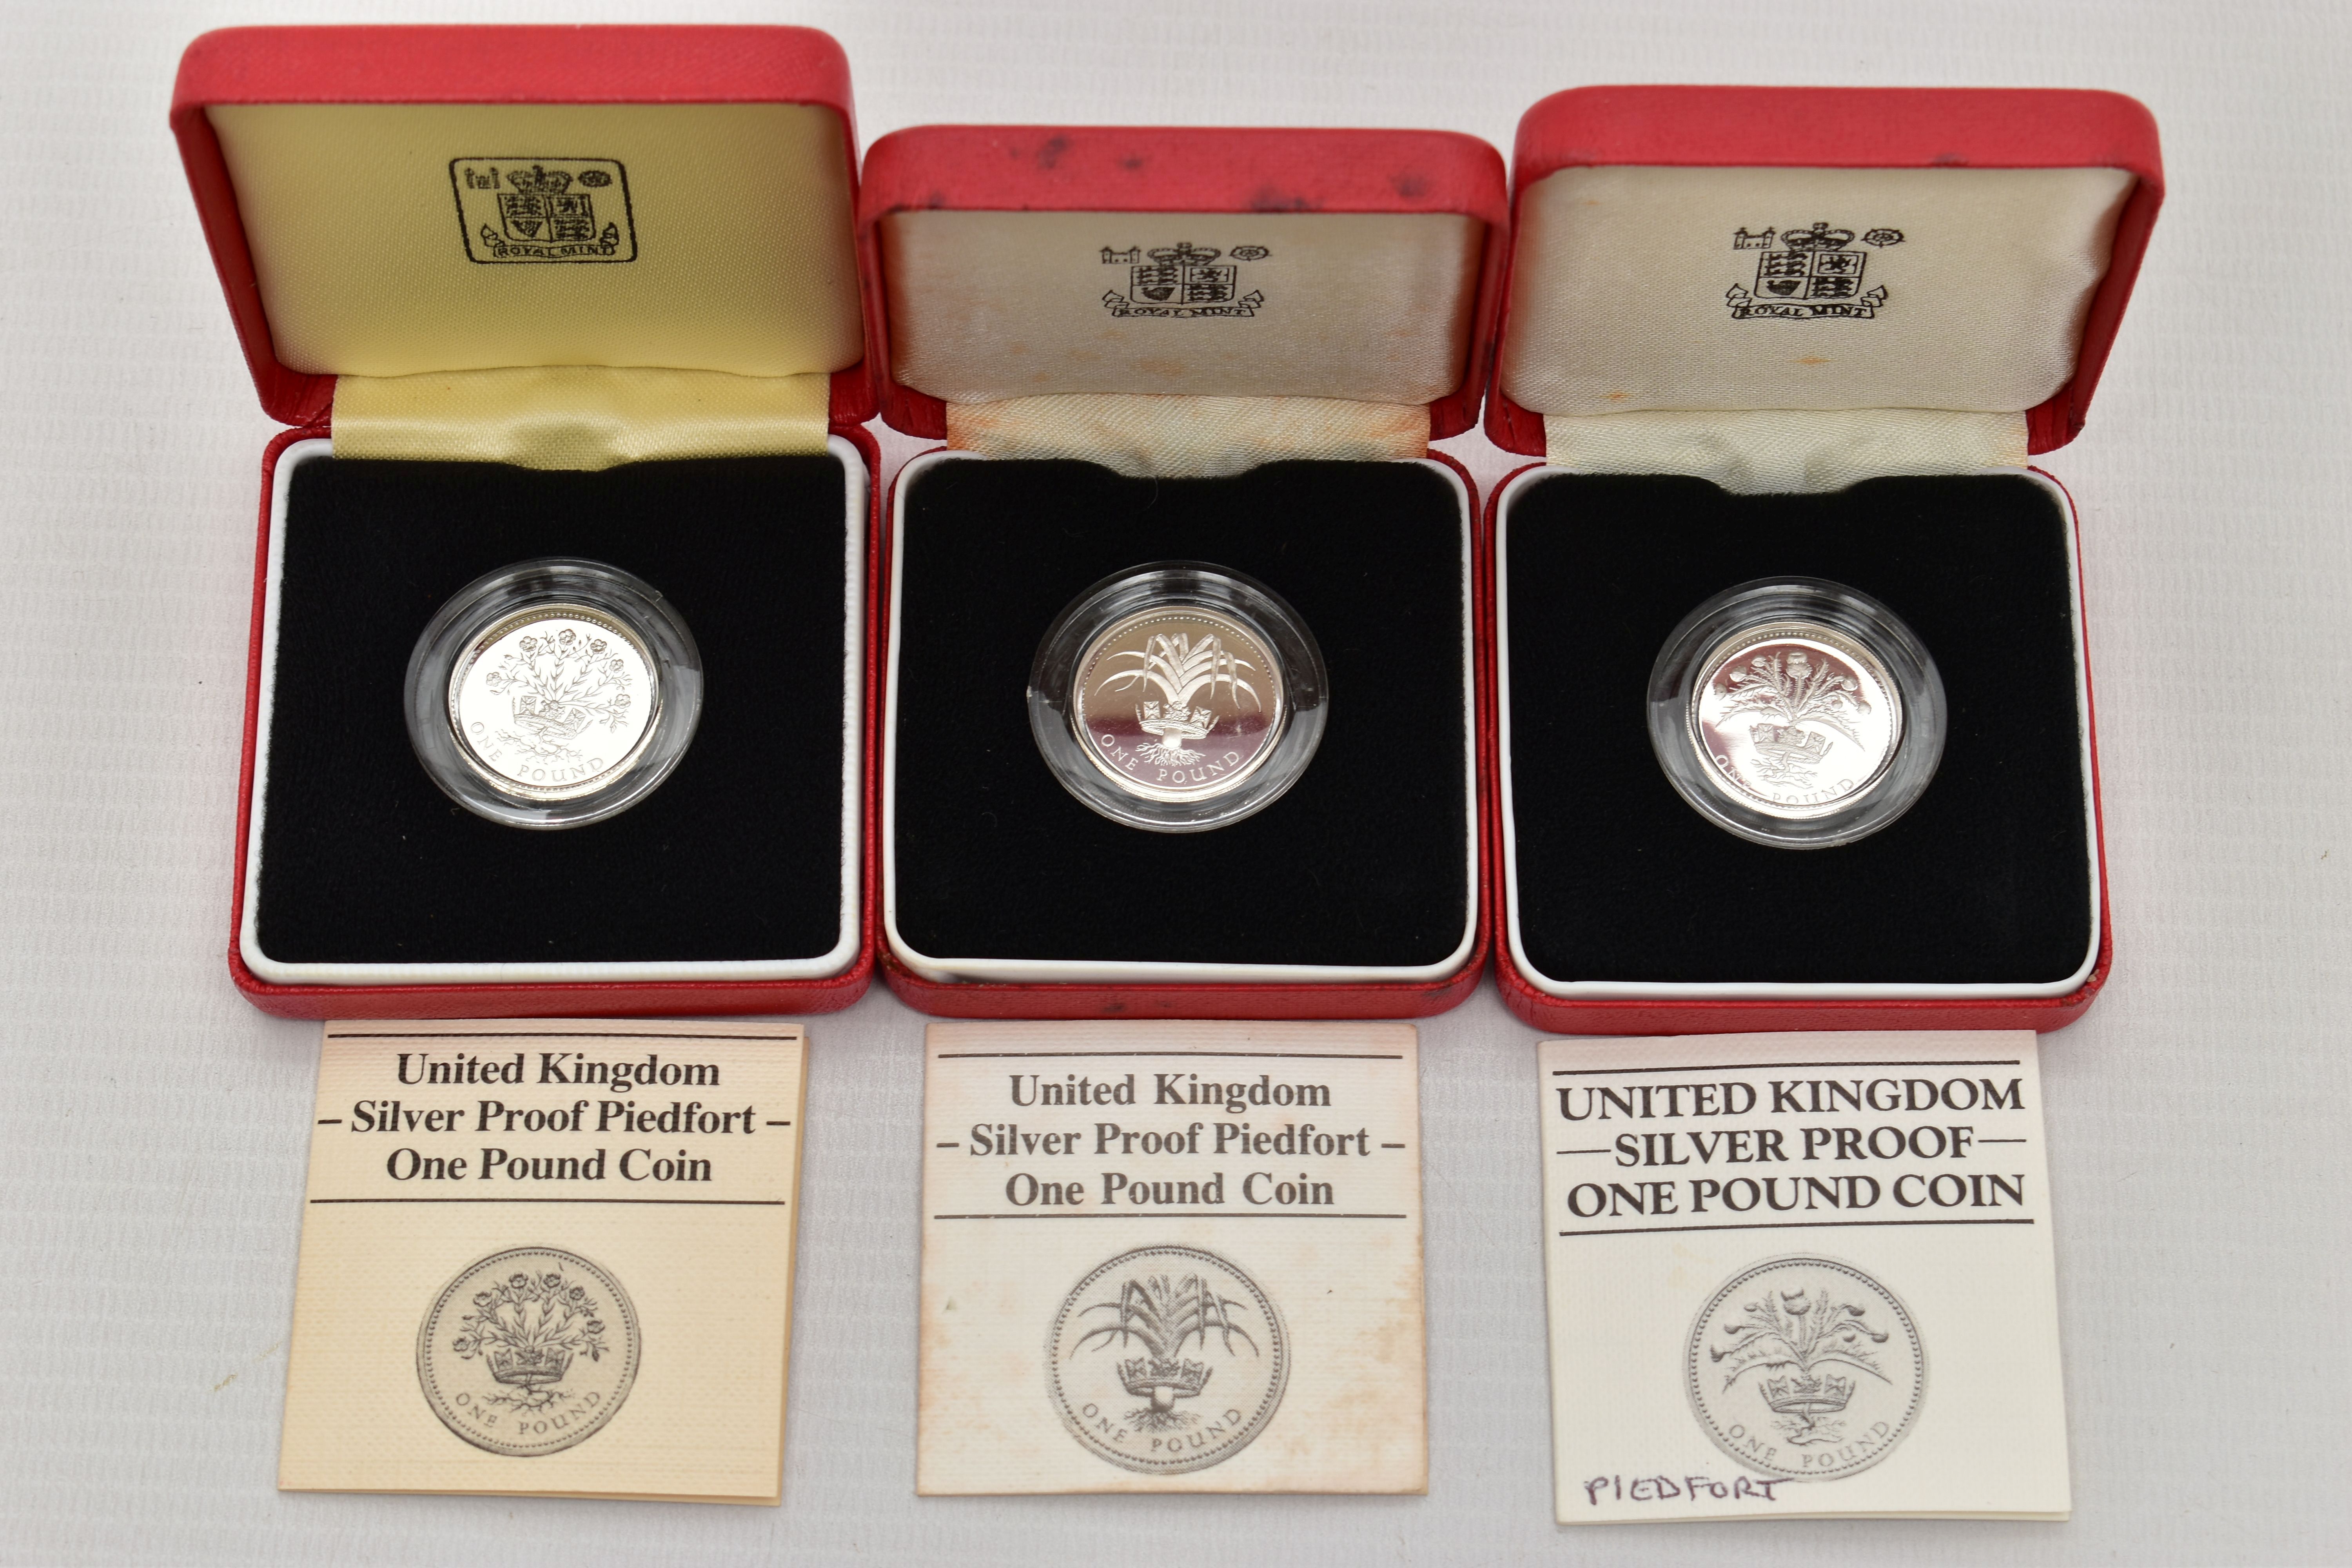 ROYAL MINT BOXED SILVER PROOF PIEDFORT ONE POUND COINS 1984,1985,1986 all in Royal Mint cases with